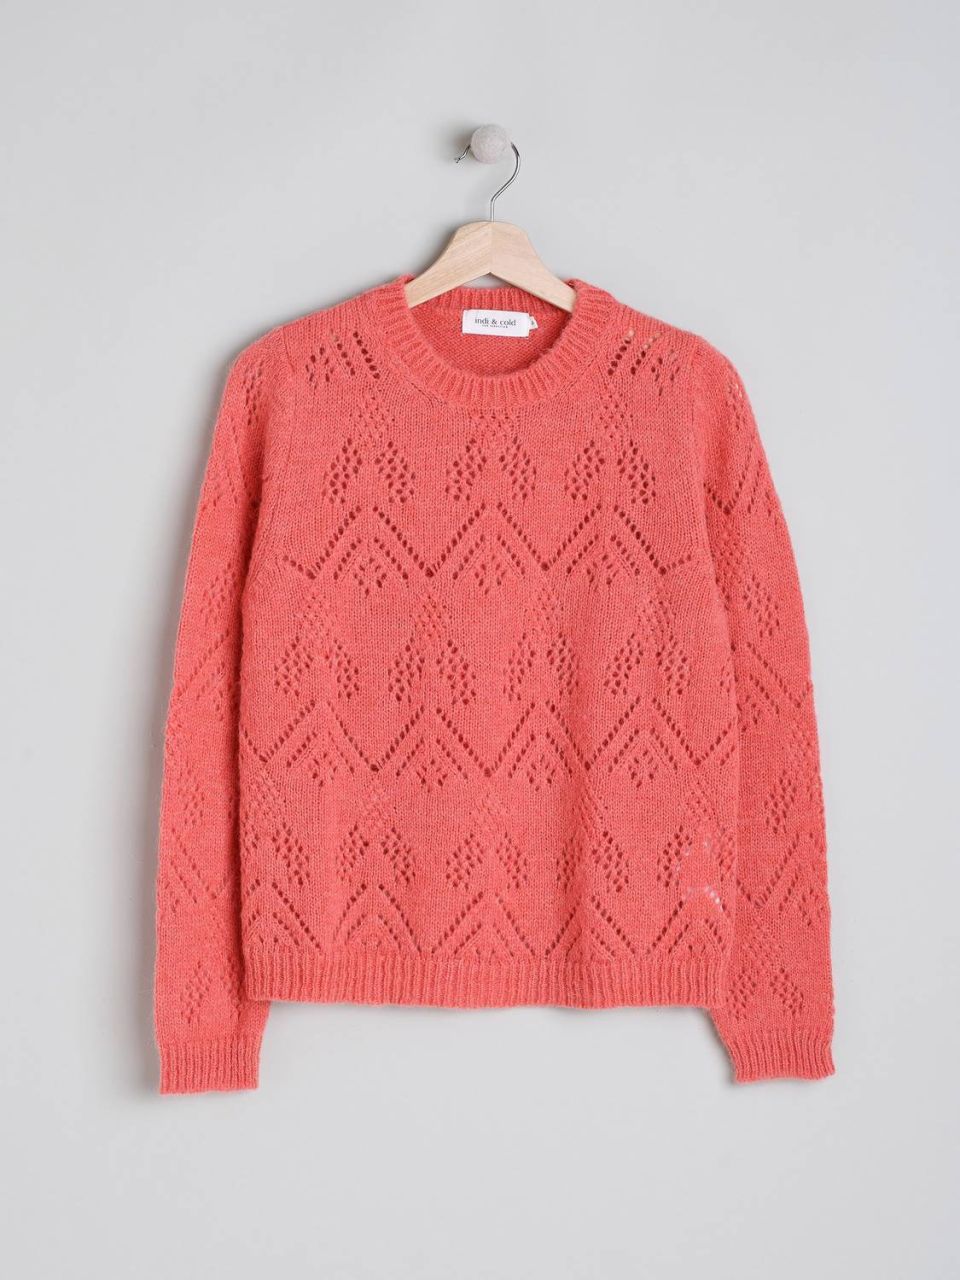 Indi & Cold Pullover Openwork Knitted Jumper Quisquilla S